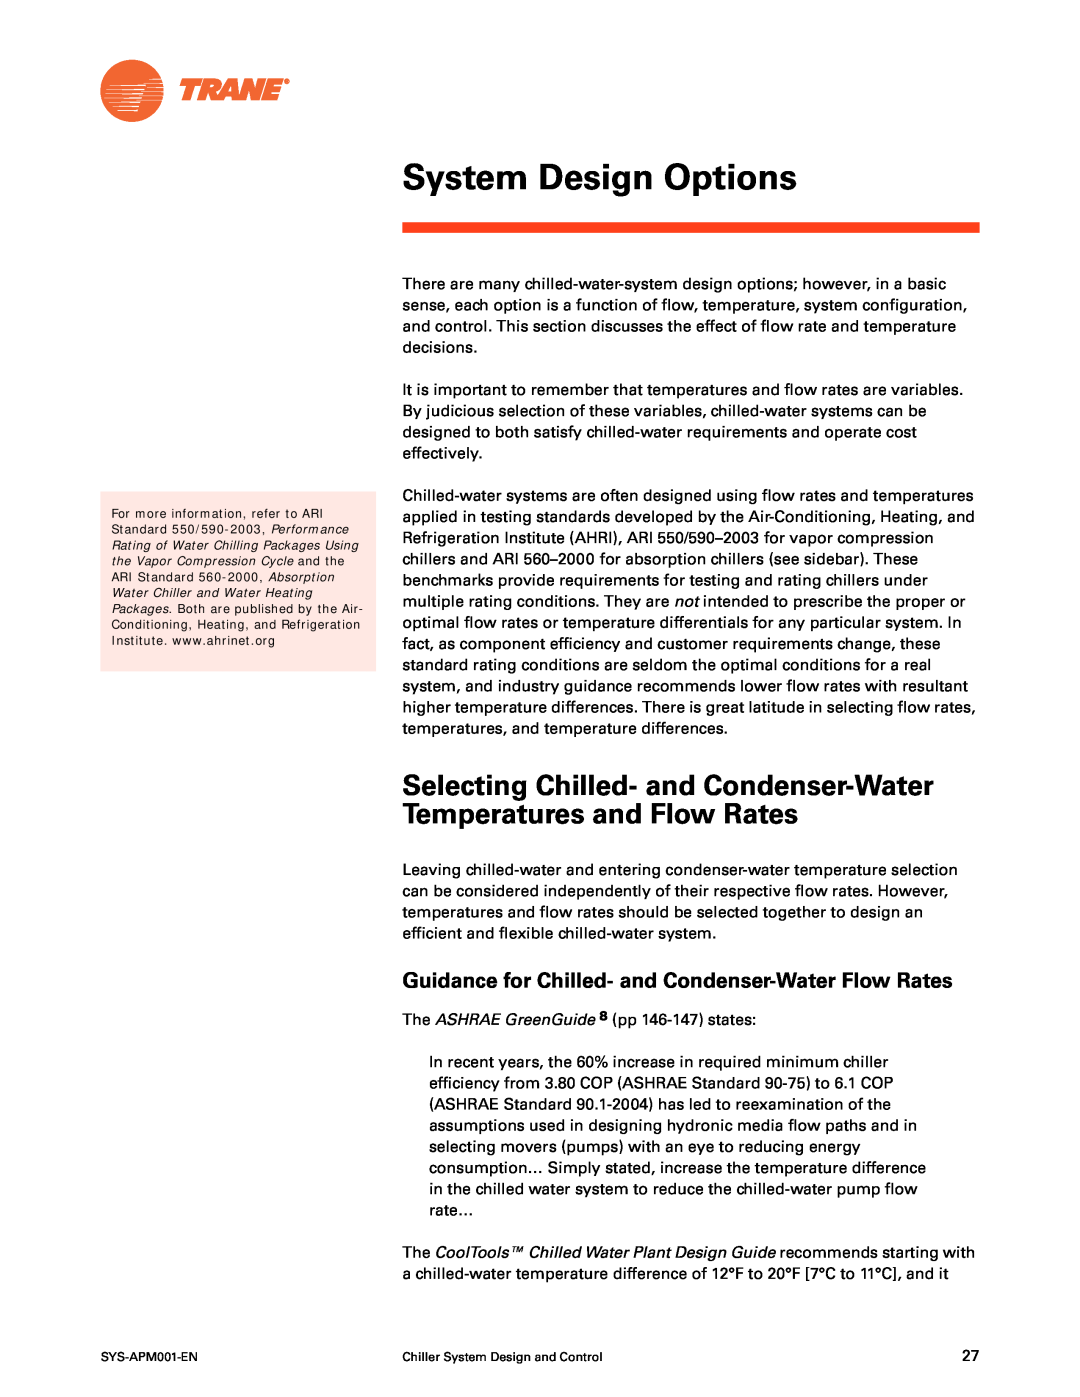 Trane SYS-APM001-EN manual System Design Options, Selecting Chilled- and Condenser-Water Temperatures and Flow Rates 